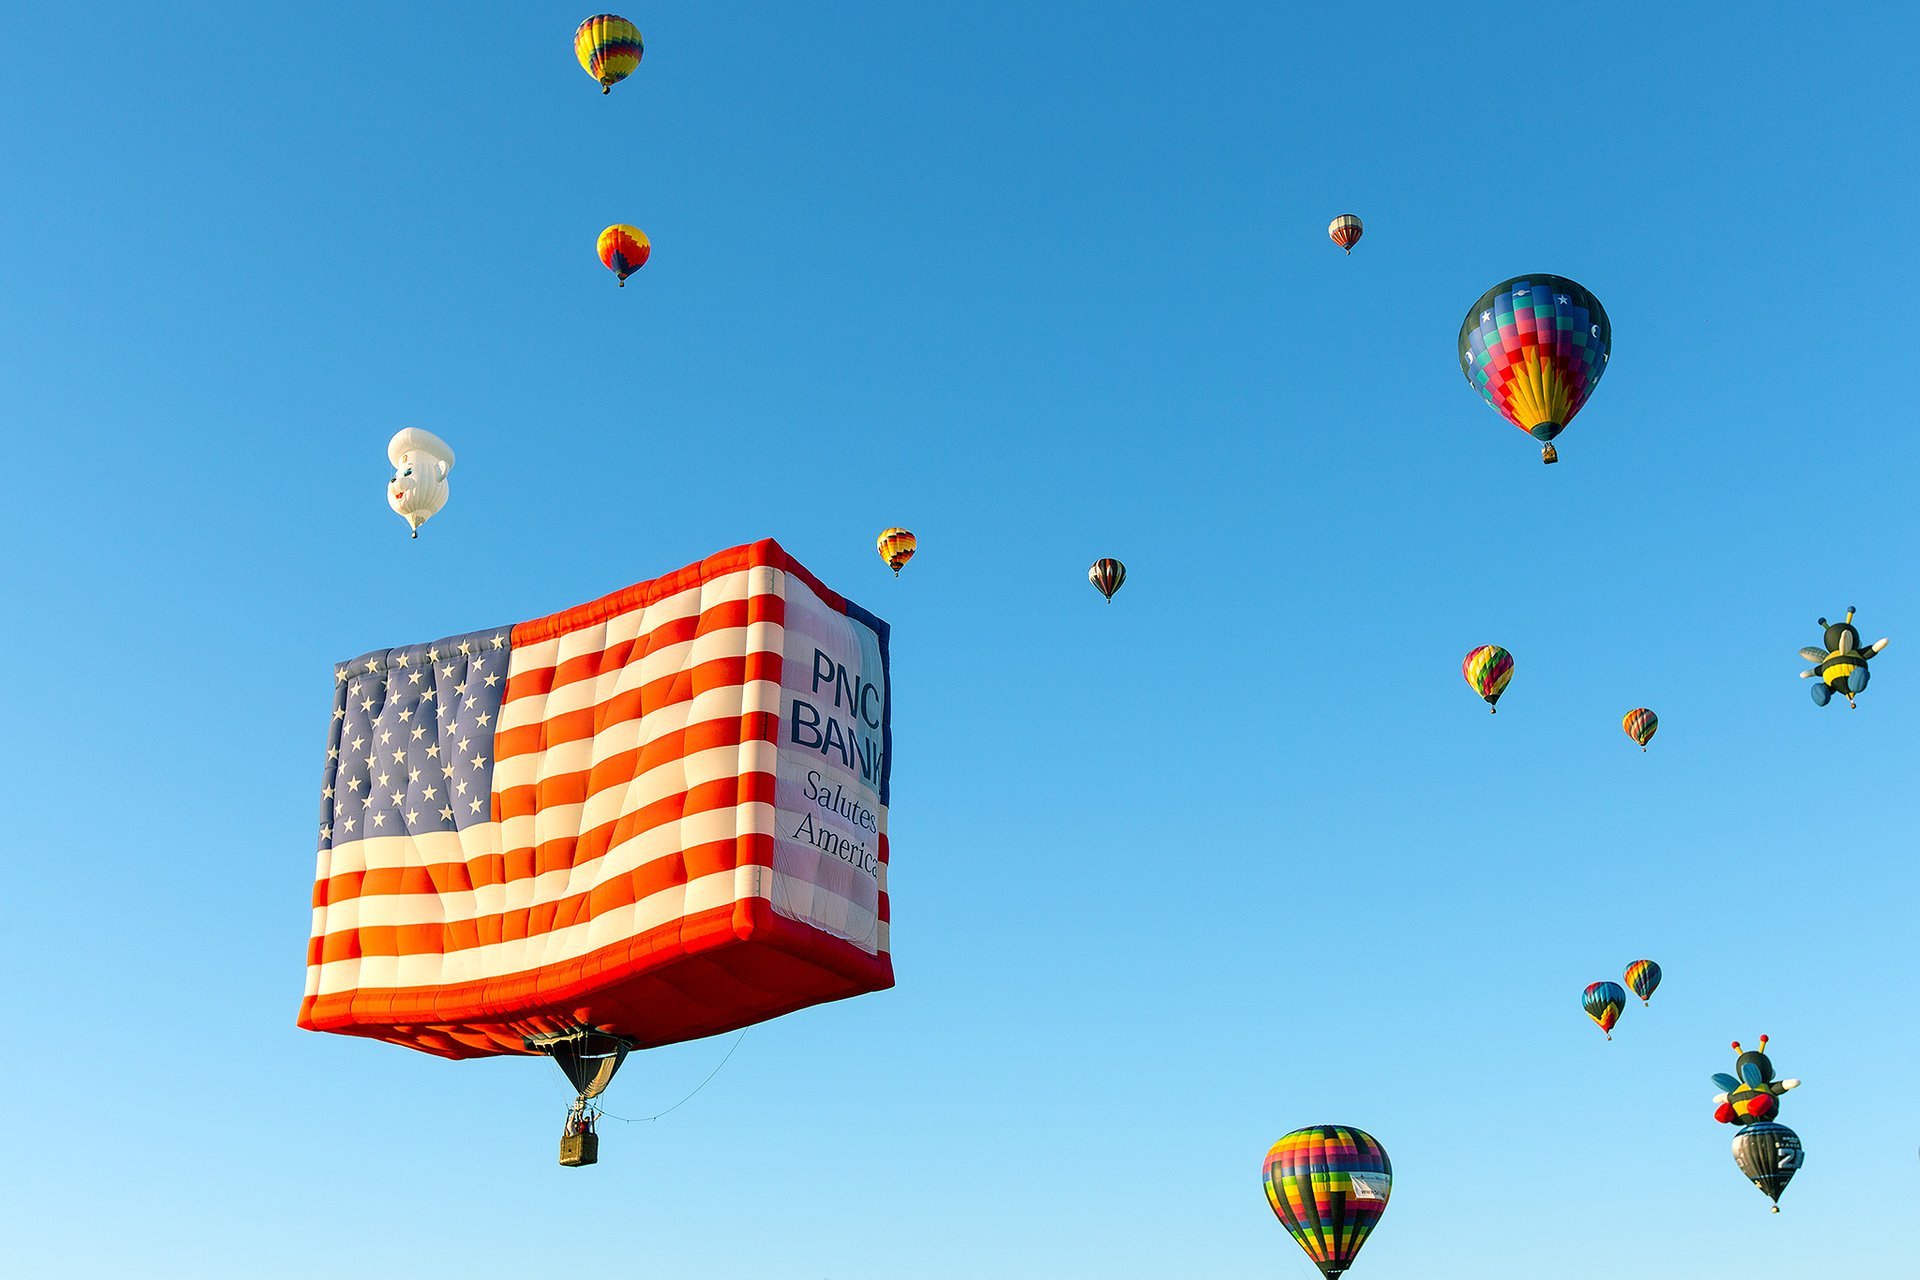 The New Jersey Festival of Ballooning 